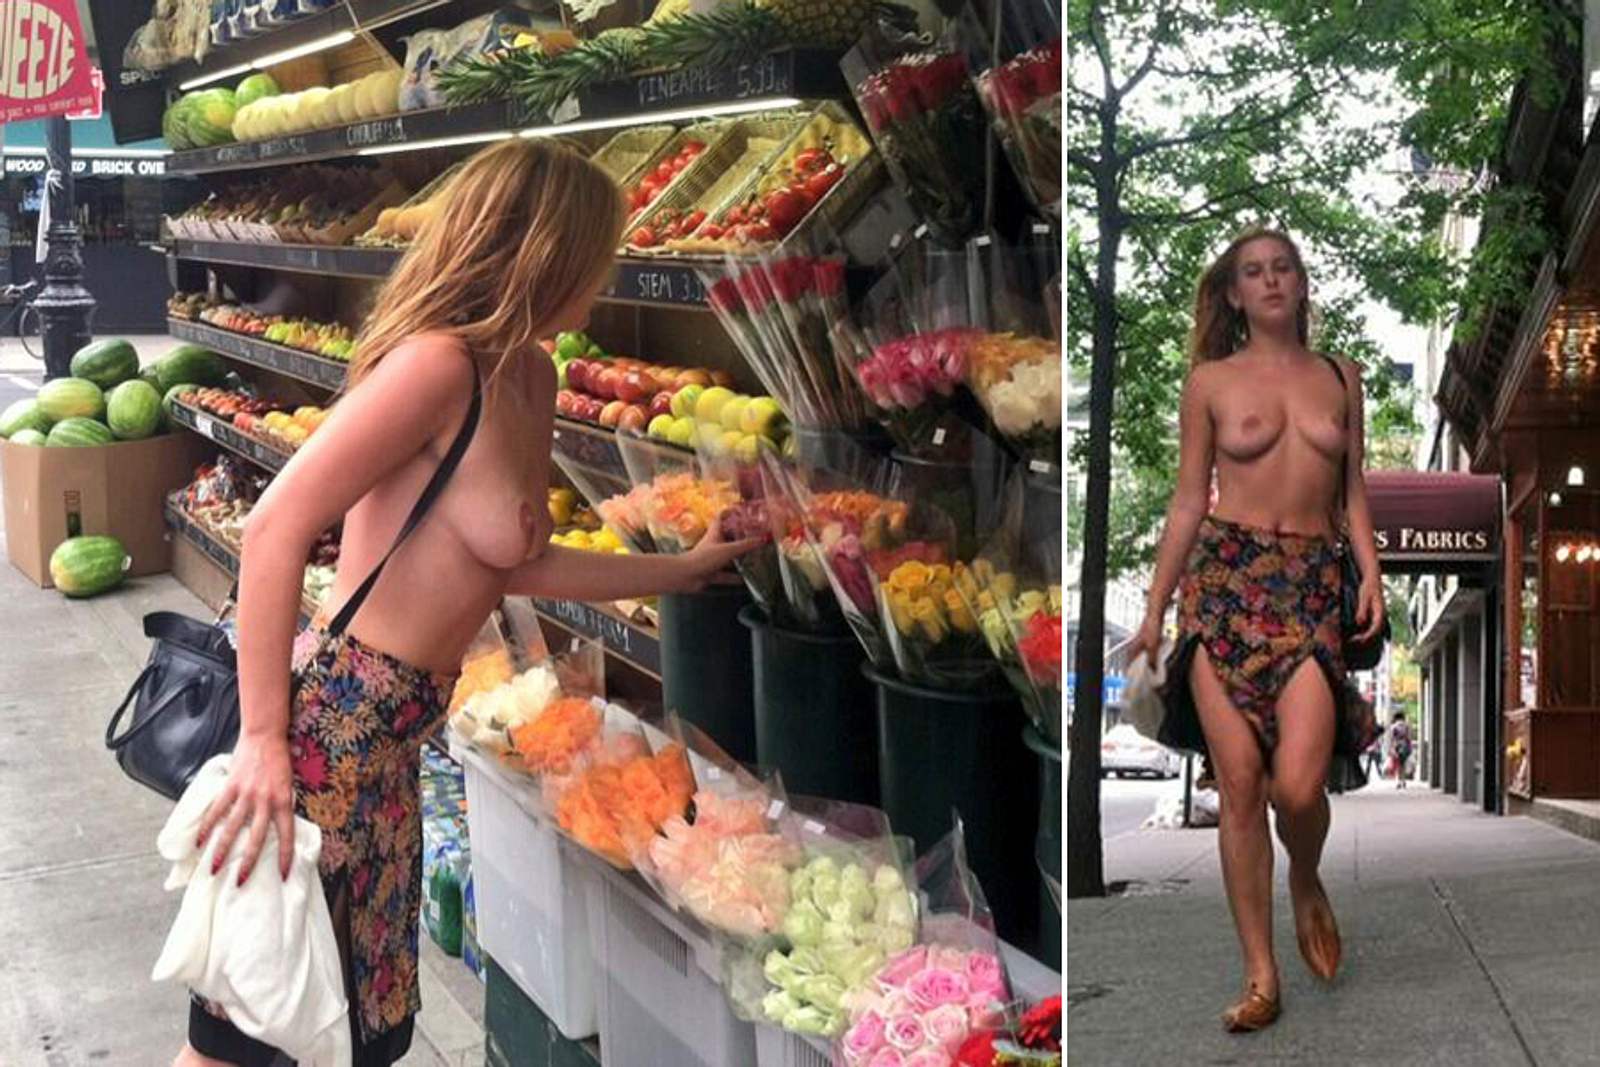 Scout willis topless shopping